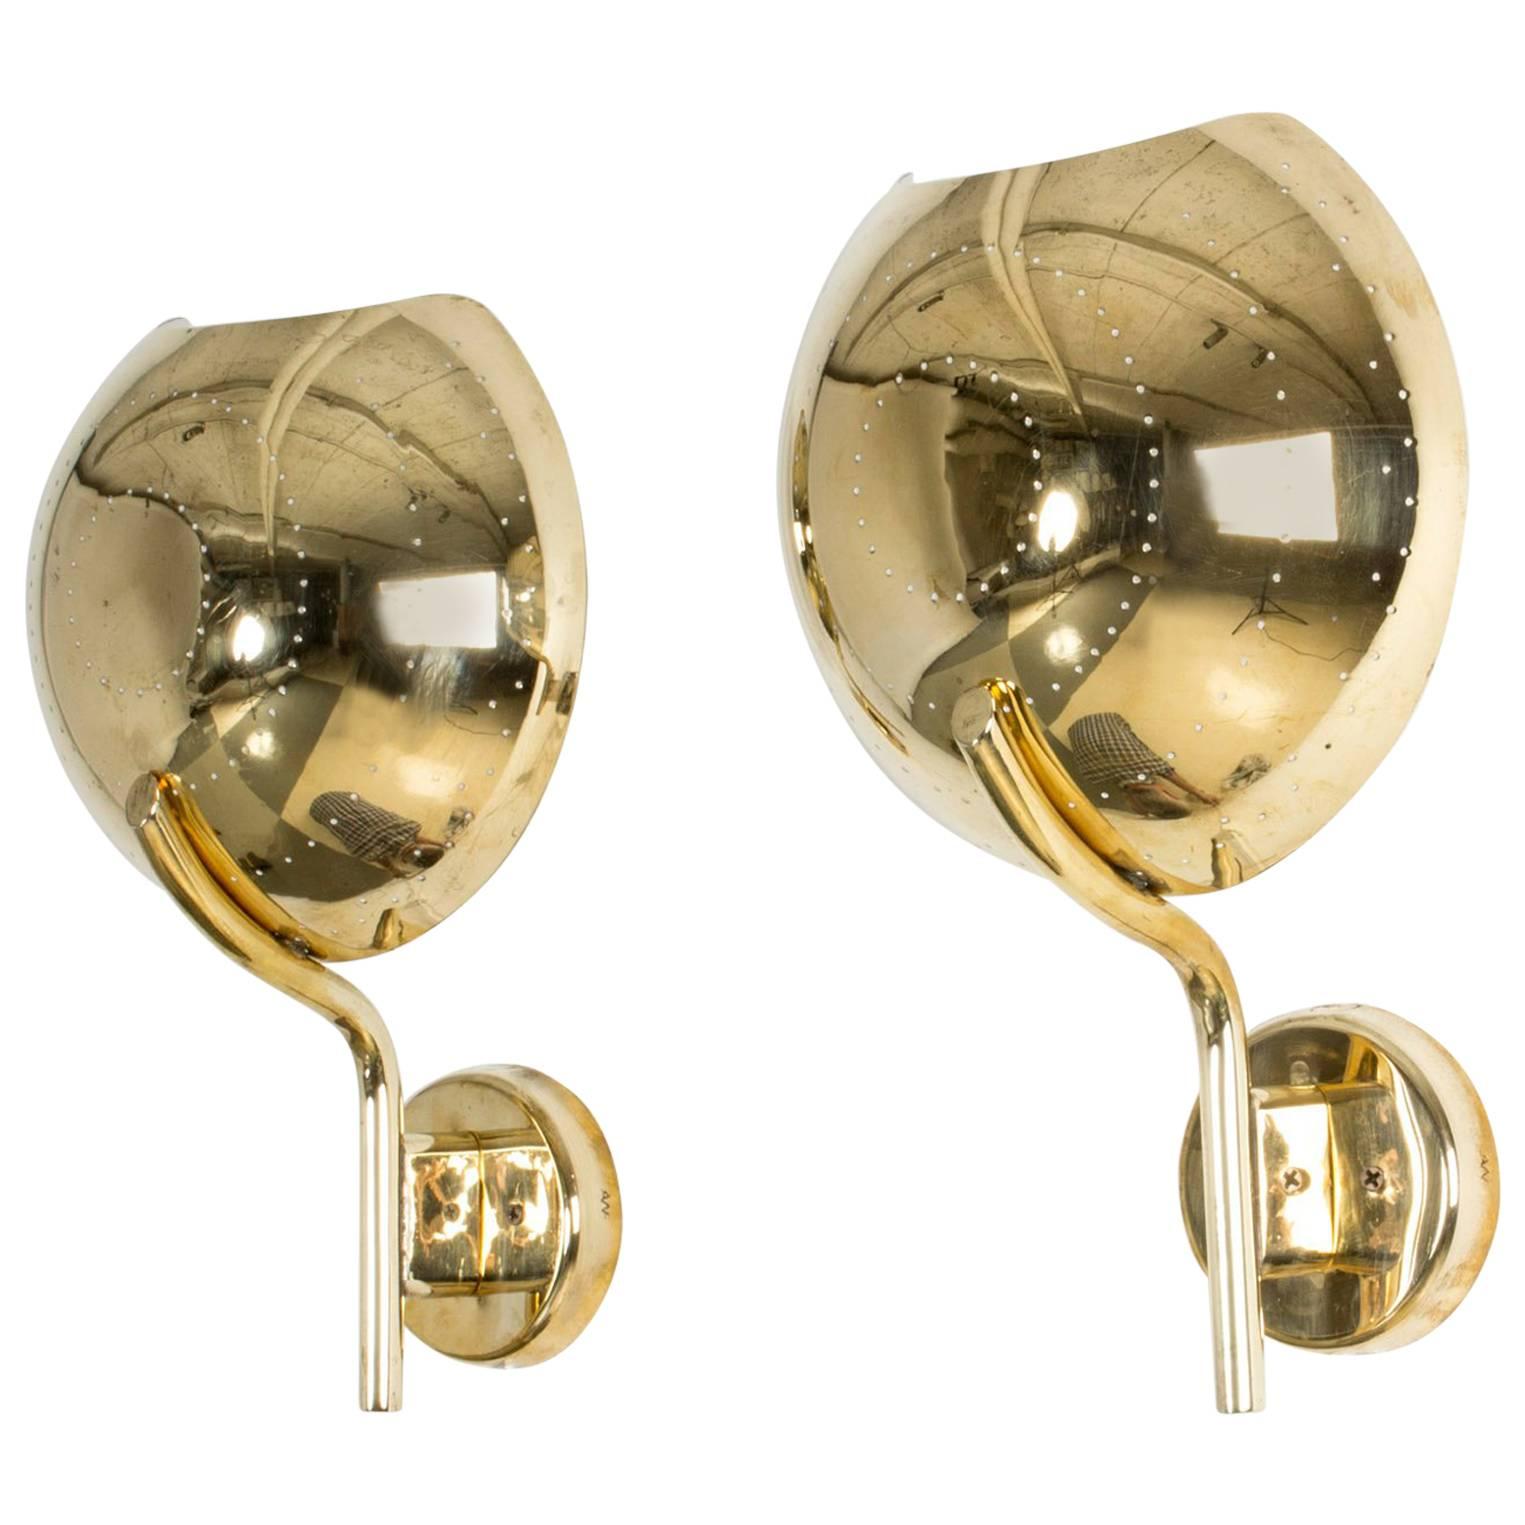 Pair of Finnish Brass Wall Sconces